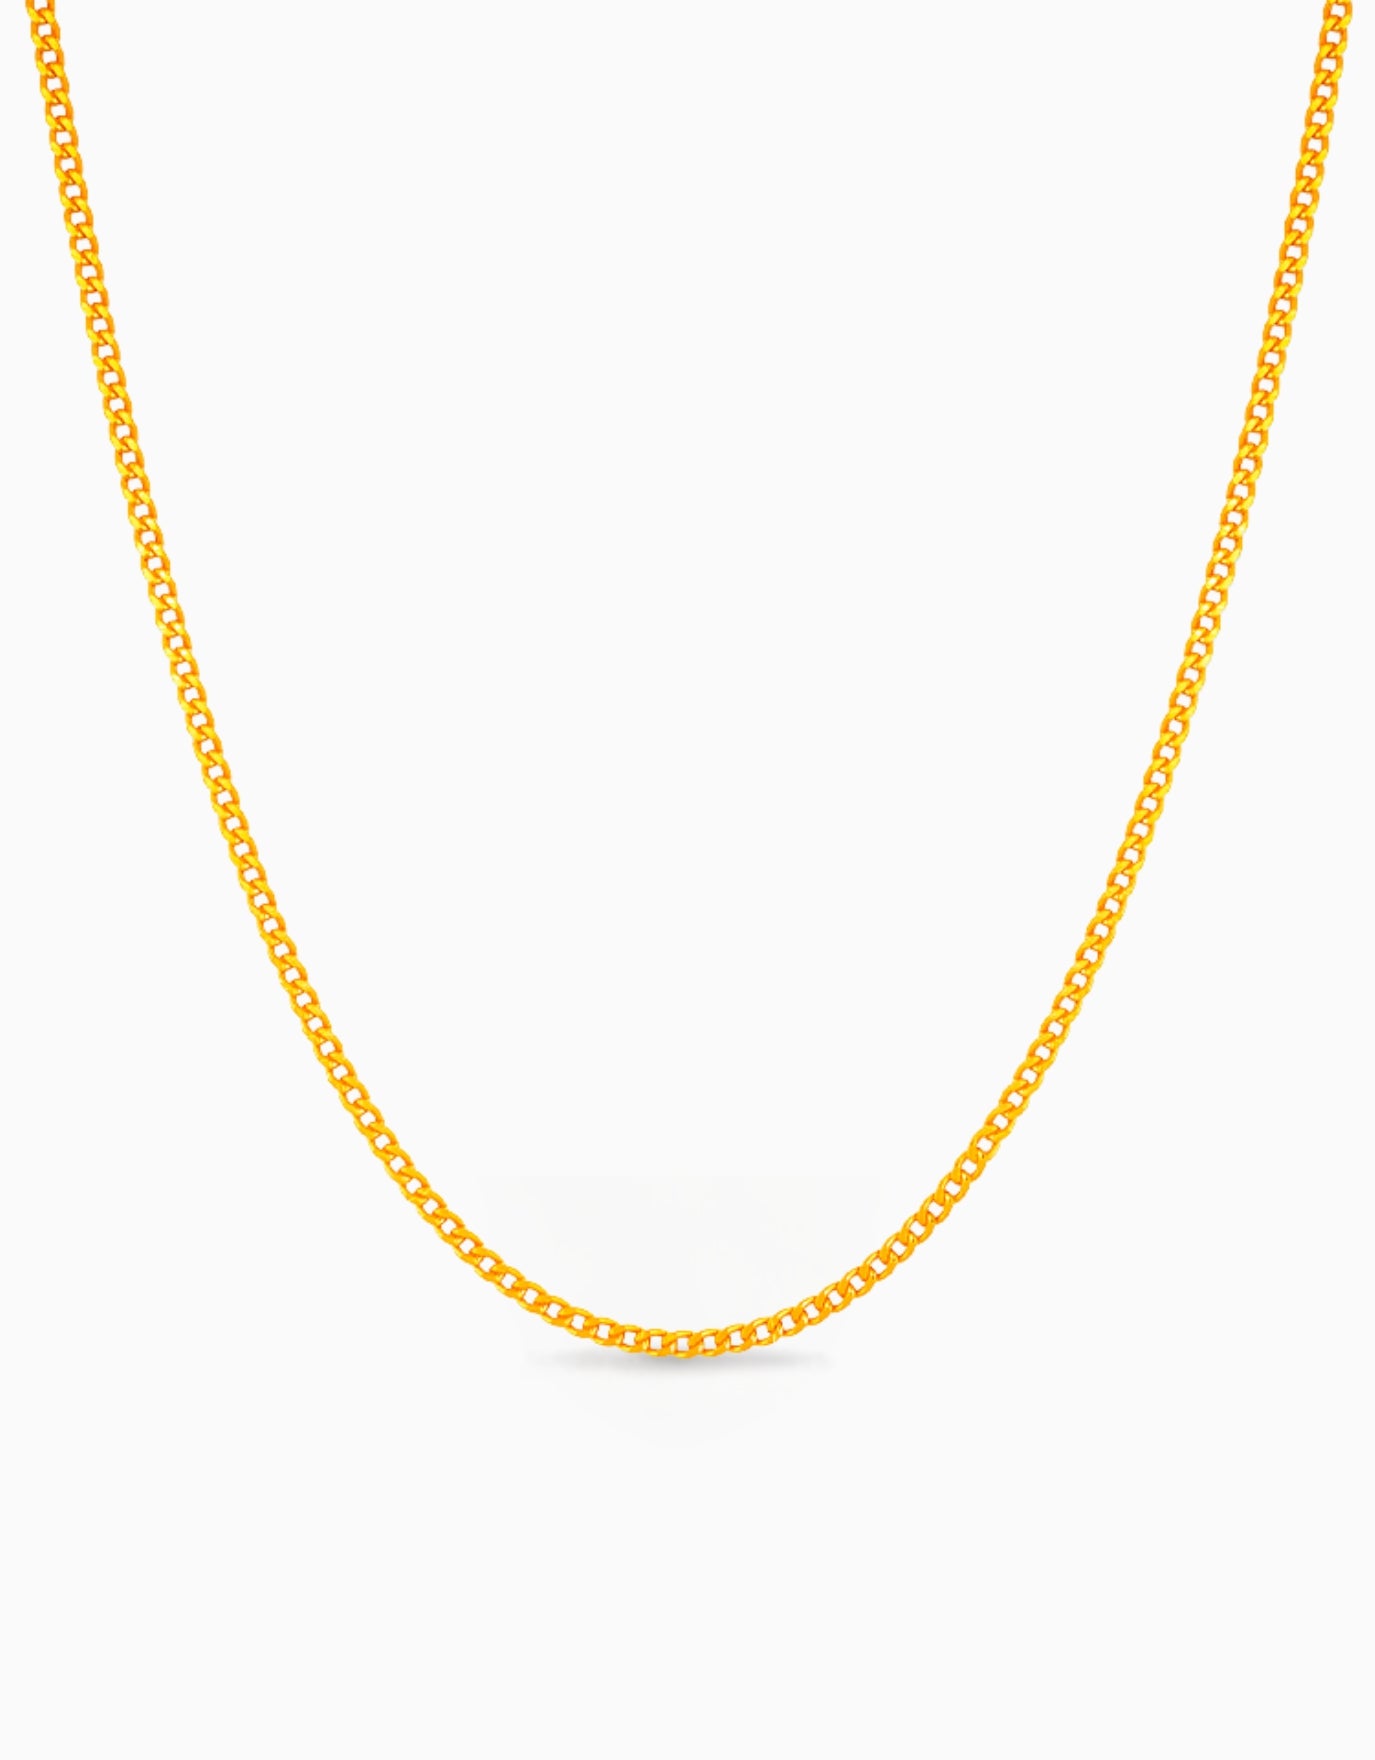 LVC 9IN 999 Gold Chain